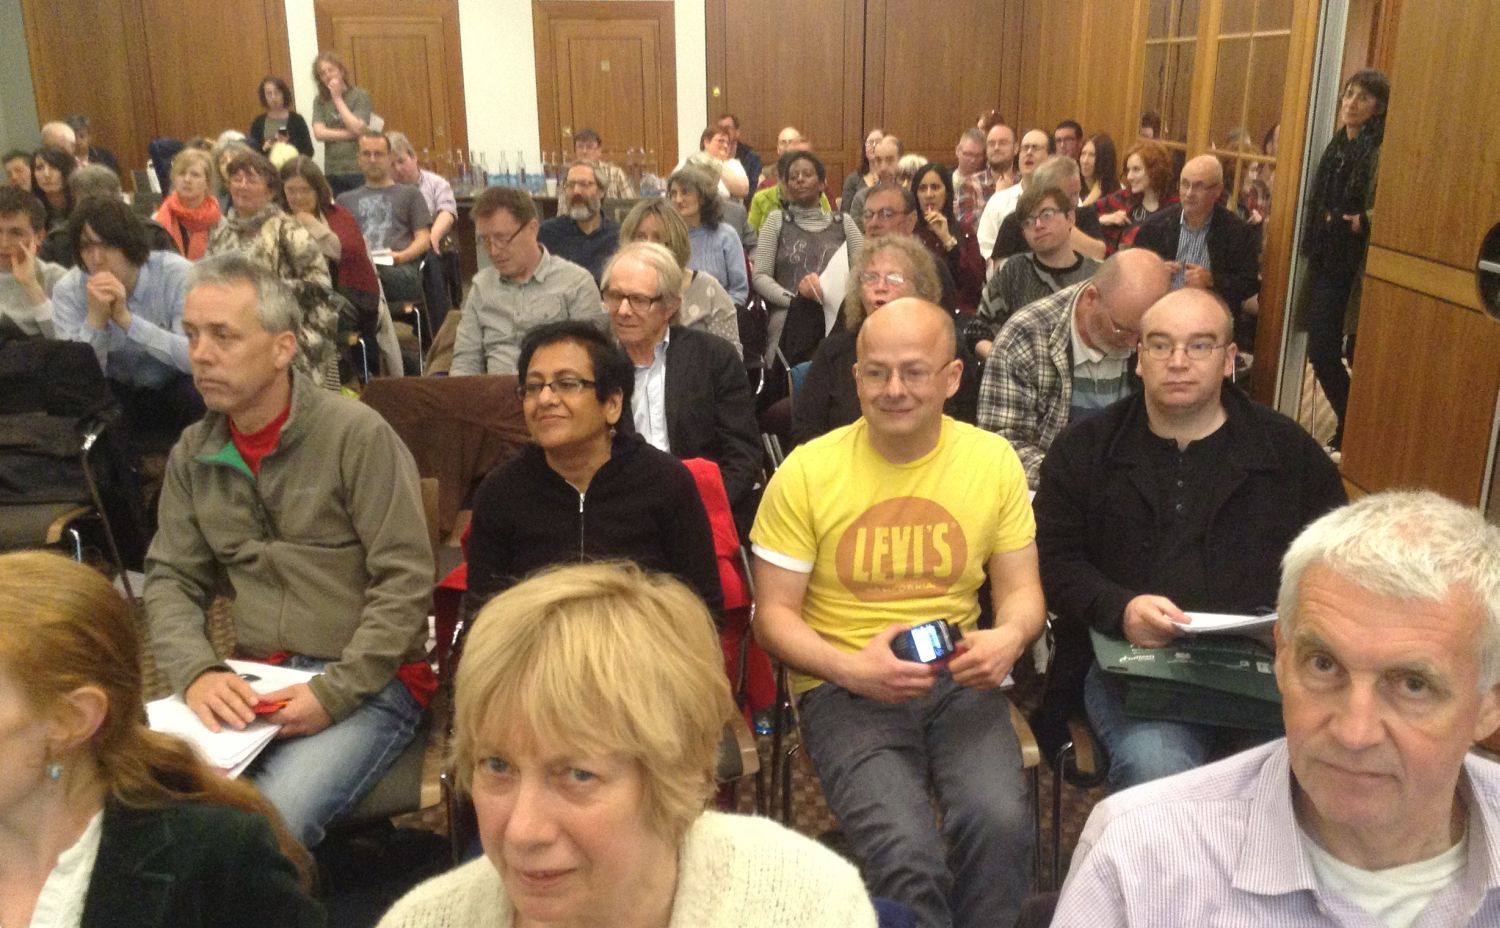 The first national Left Unity meeting last Saturday